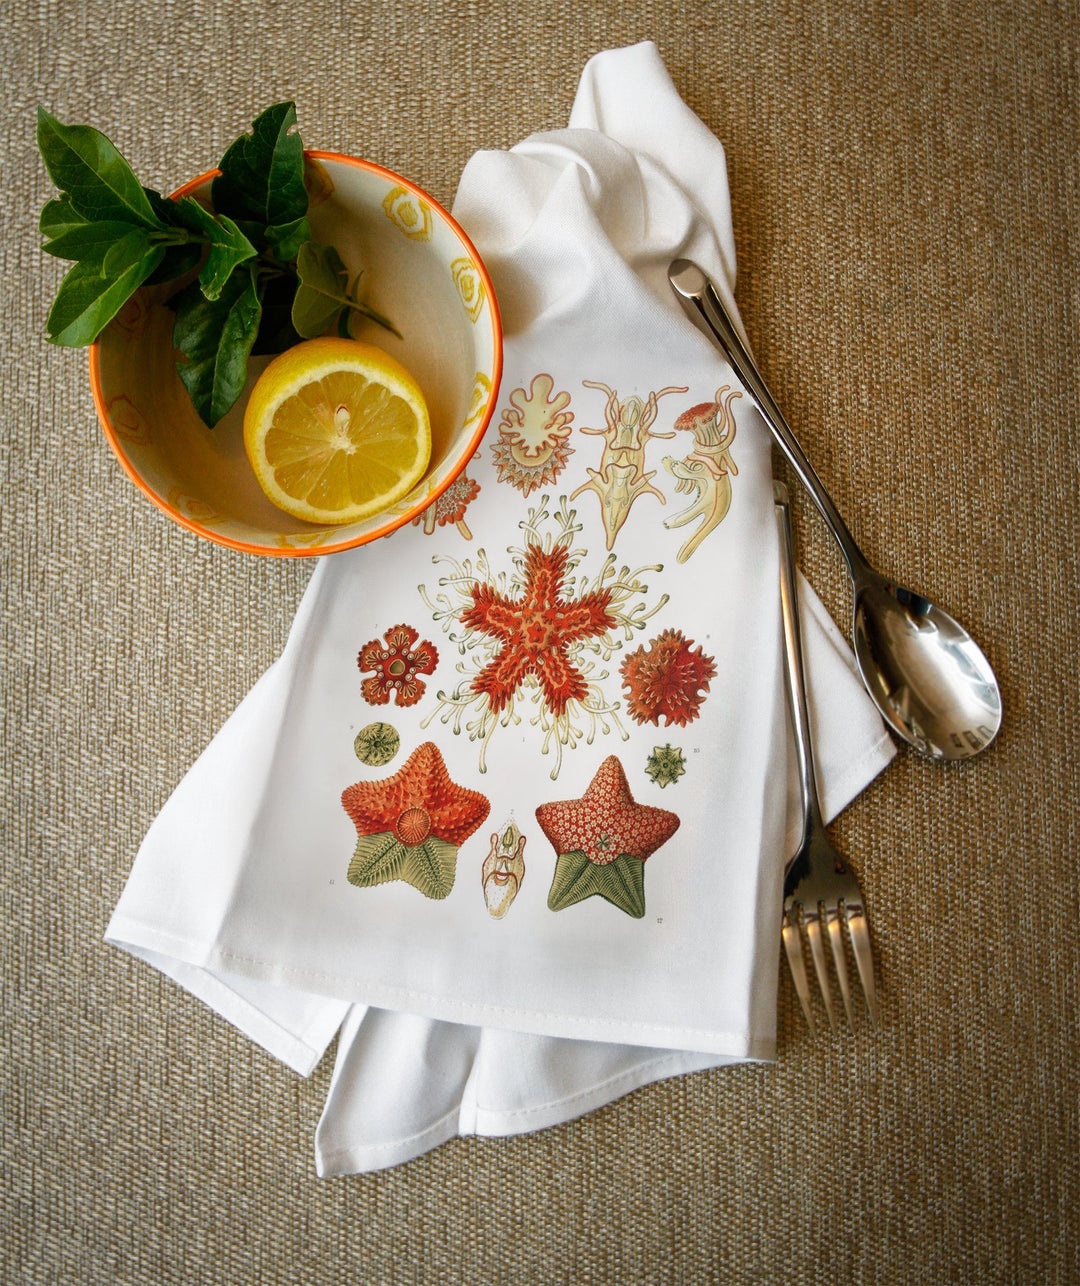 Art Forms of Nature, Asteridea, Ernst Haeckel Artwork, Towels and Aprons Kitchen Lantern Press 